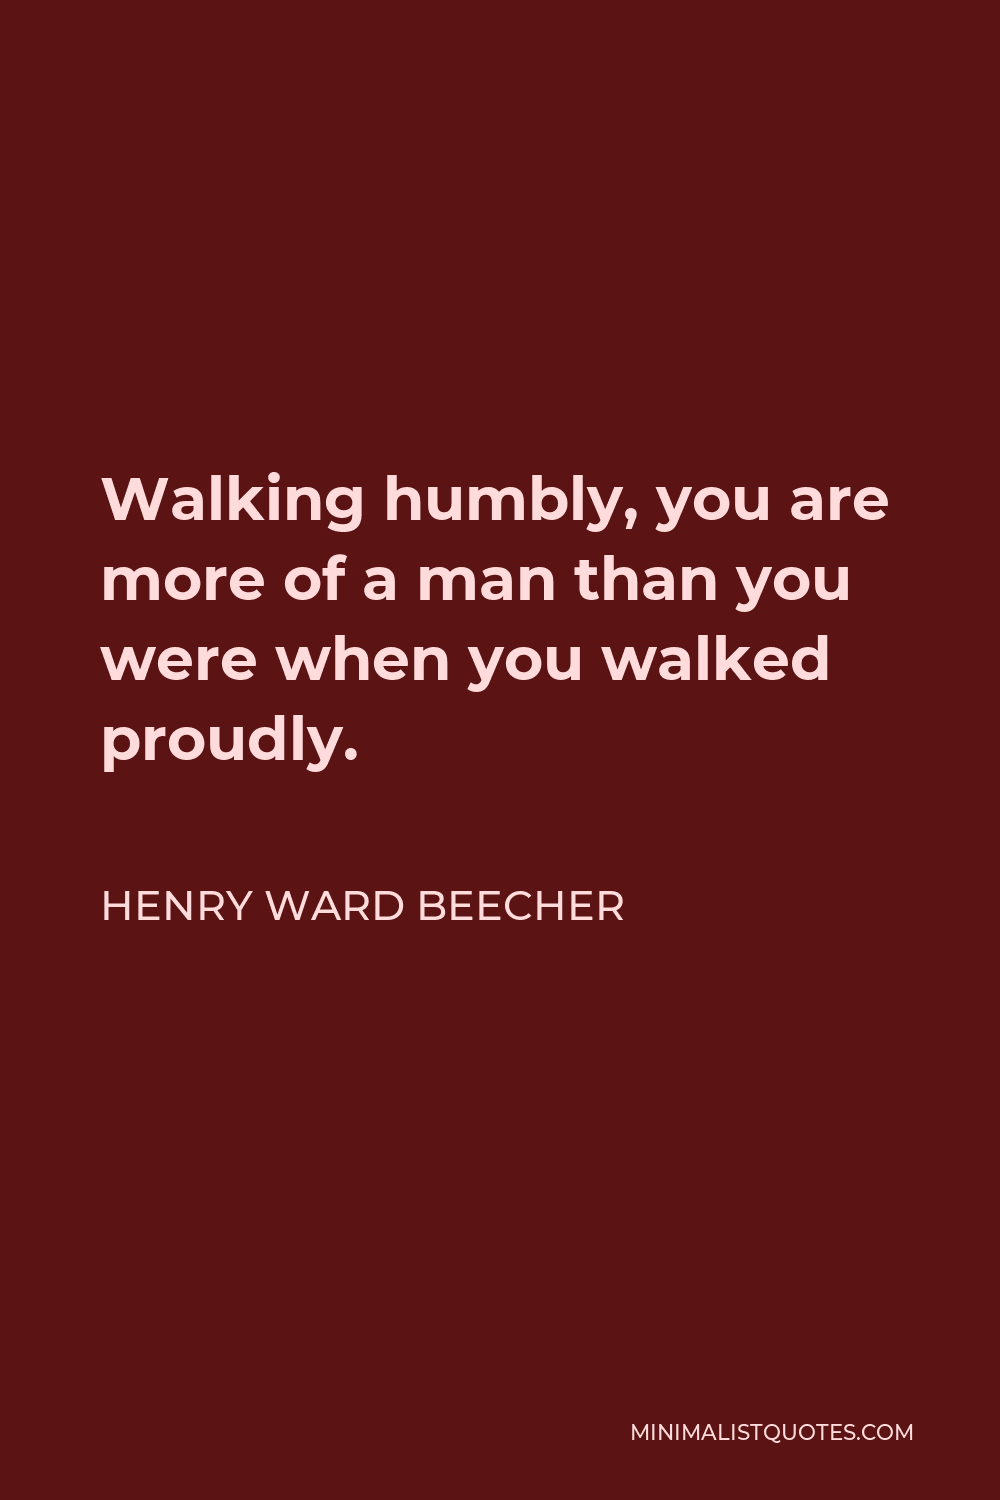 Henry Ward Beecher Quote - Walking humbly, you are more of a man than you were when you walked proudly.